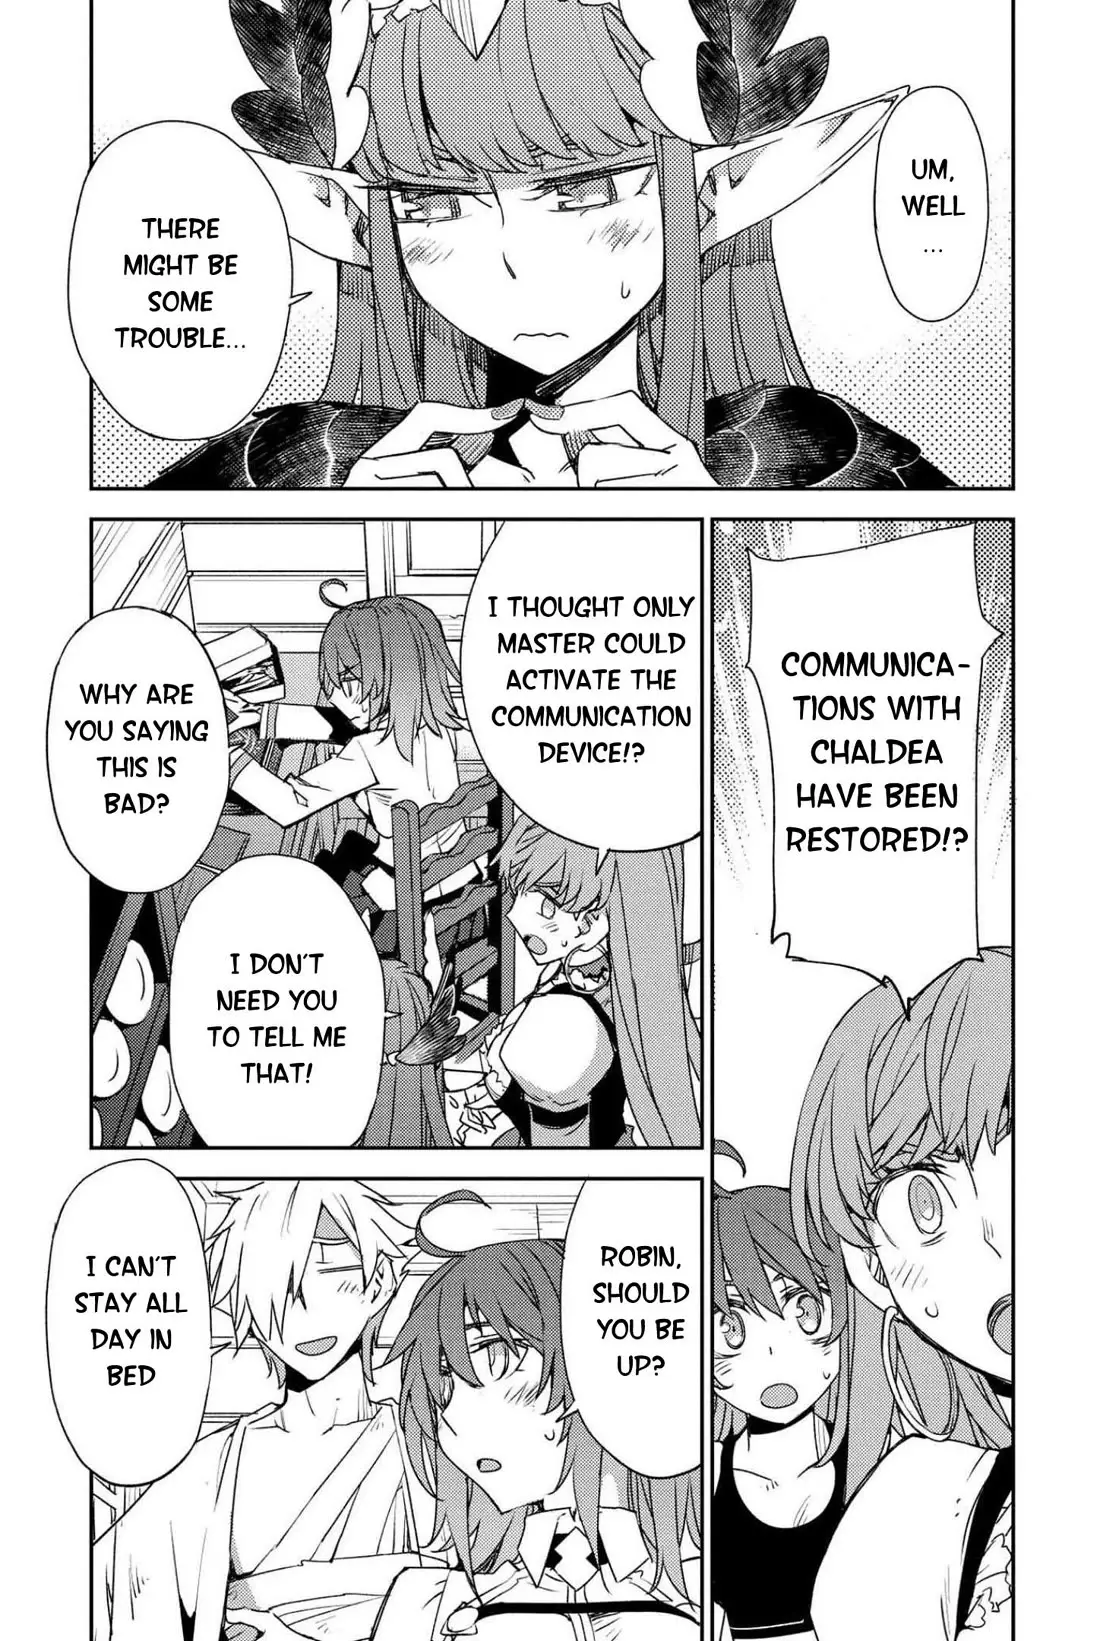 Fate/grand Order: Epic Of Remnant - Subspecies Singularity Iv: Taboo Advent Salem: Salem Of Heresy - 27 page 10-25d30369